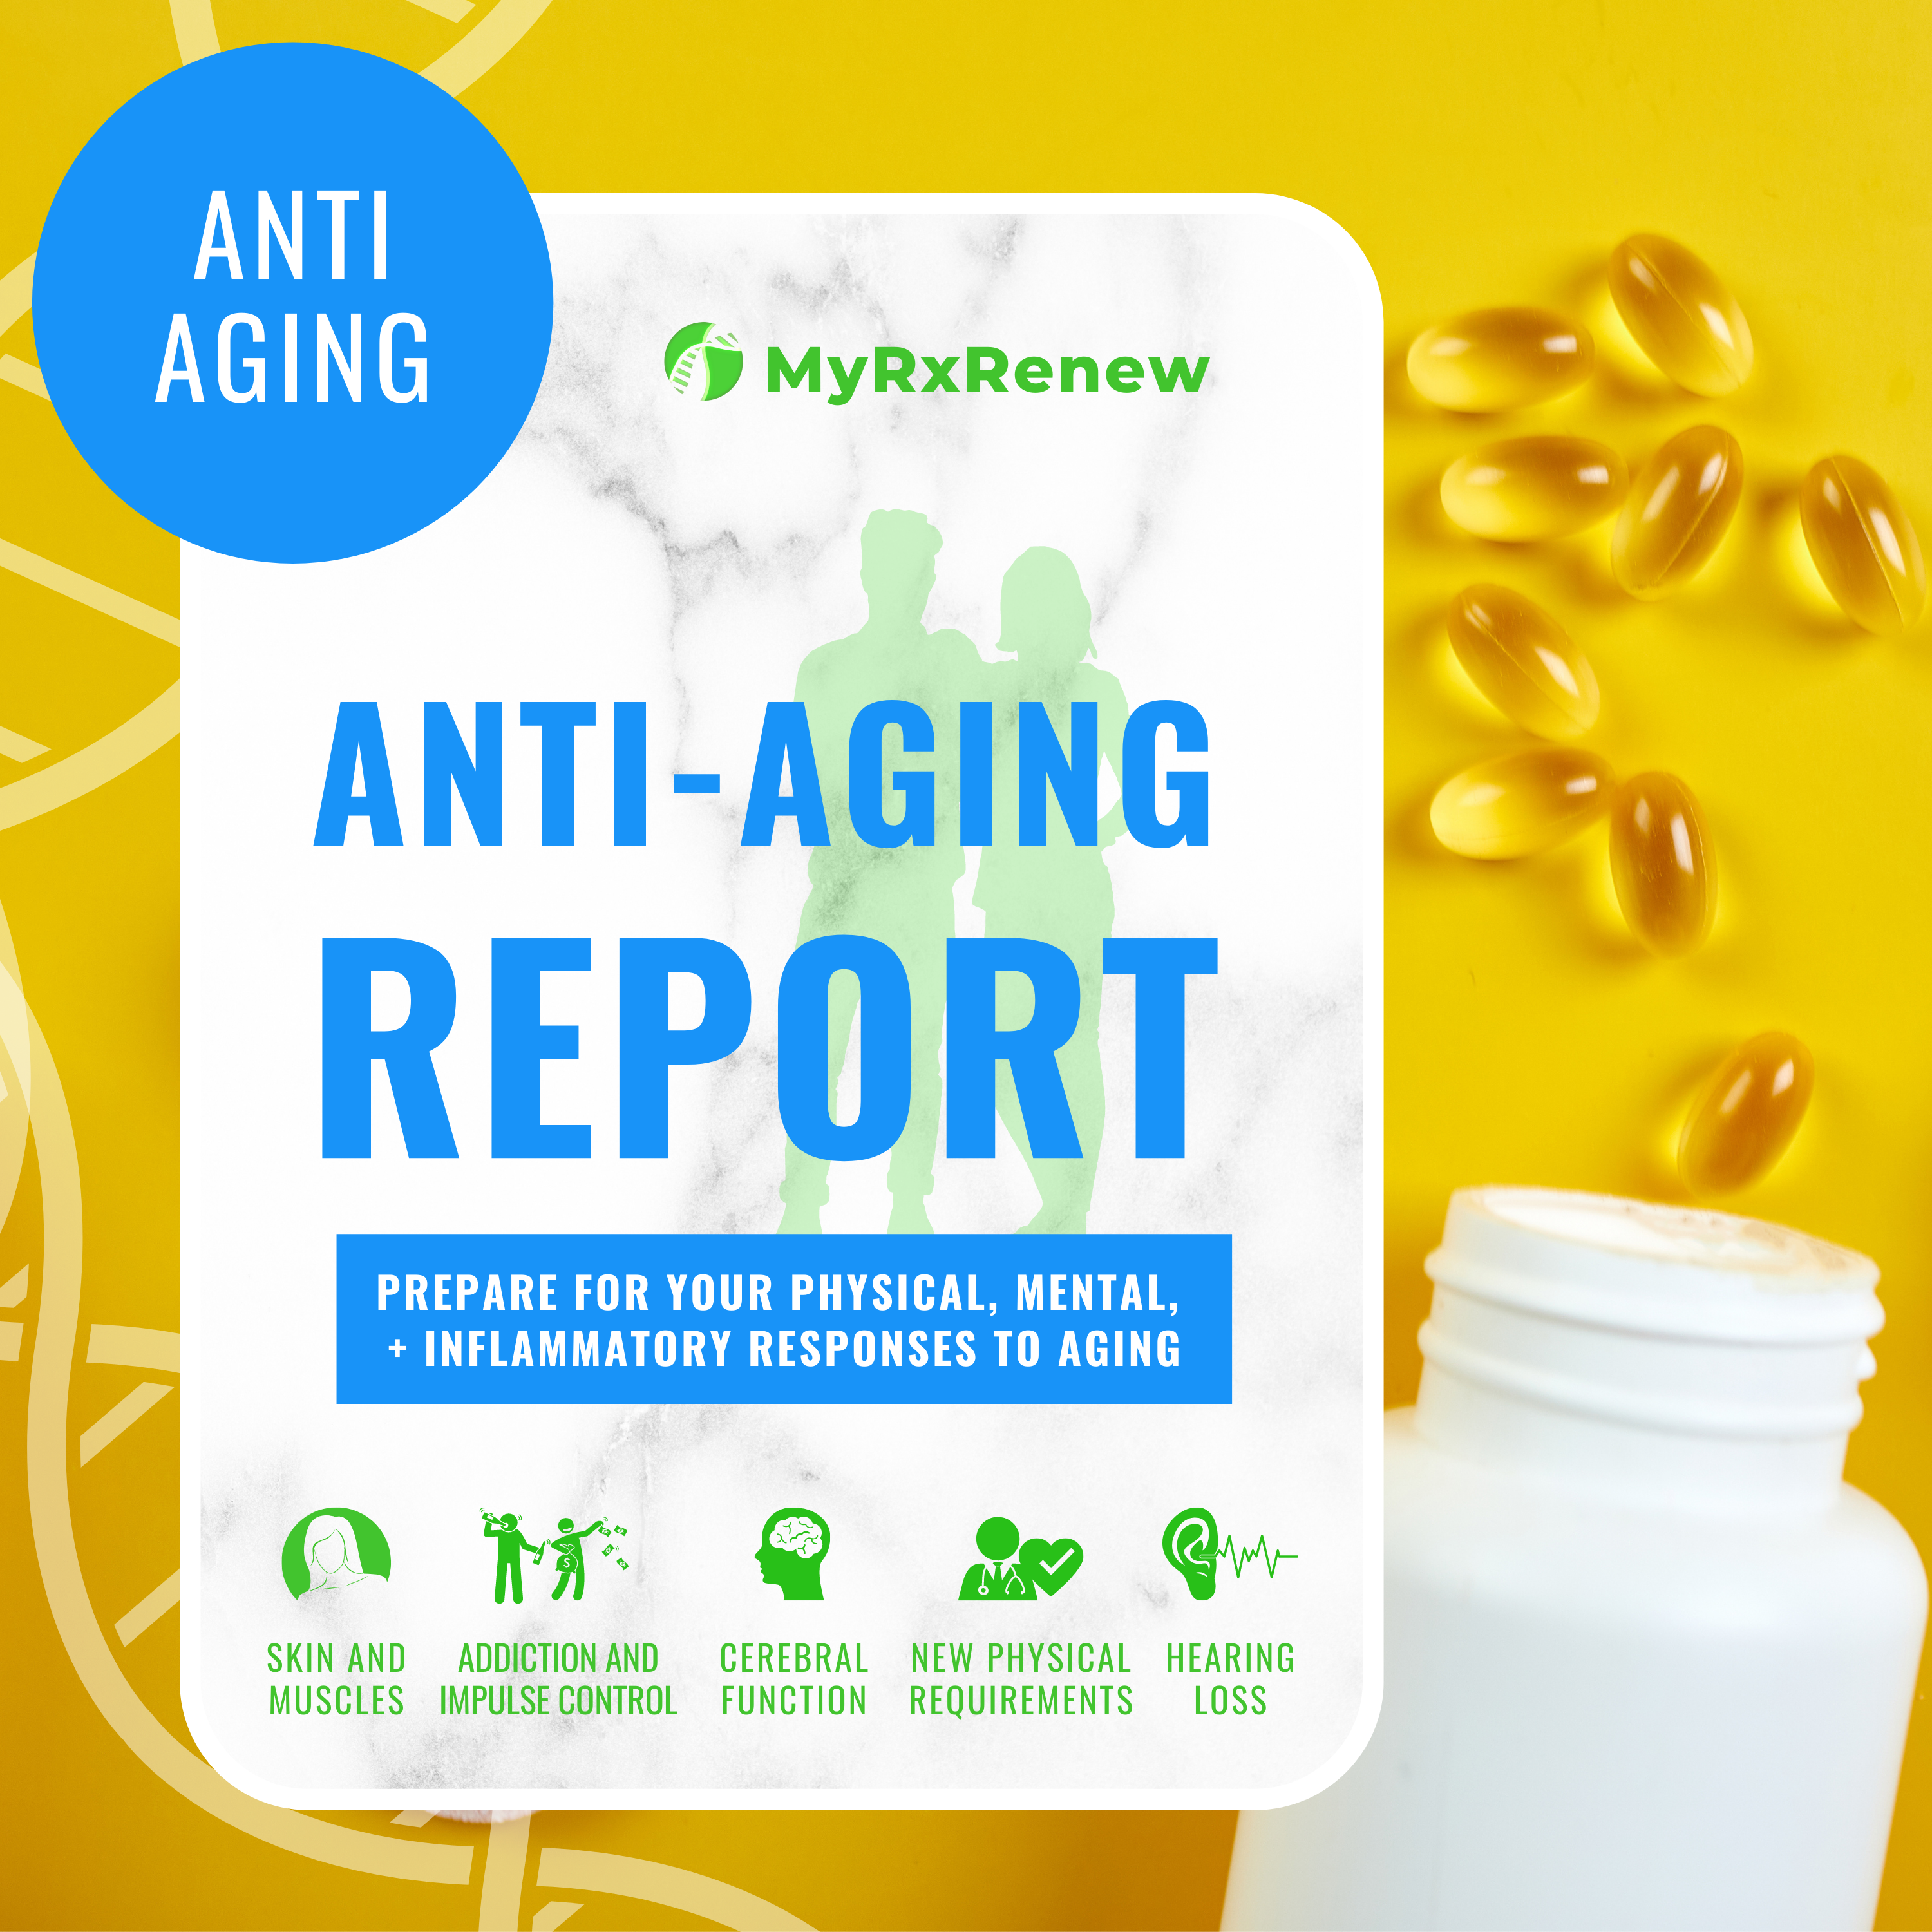 MyRxRenew Report: Physical, Mental, + Inflammatory Responses to Aging